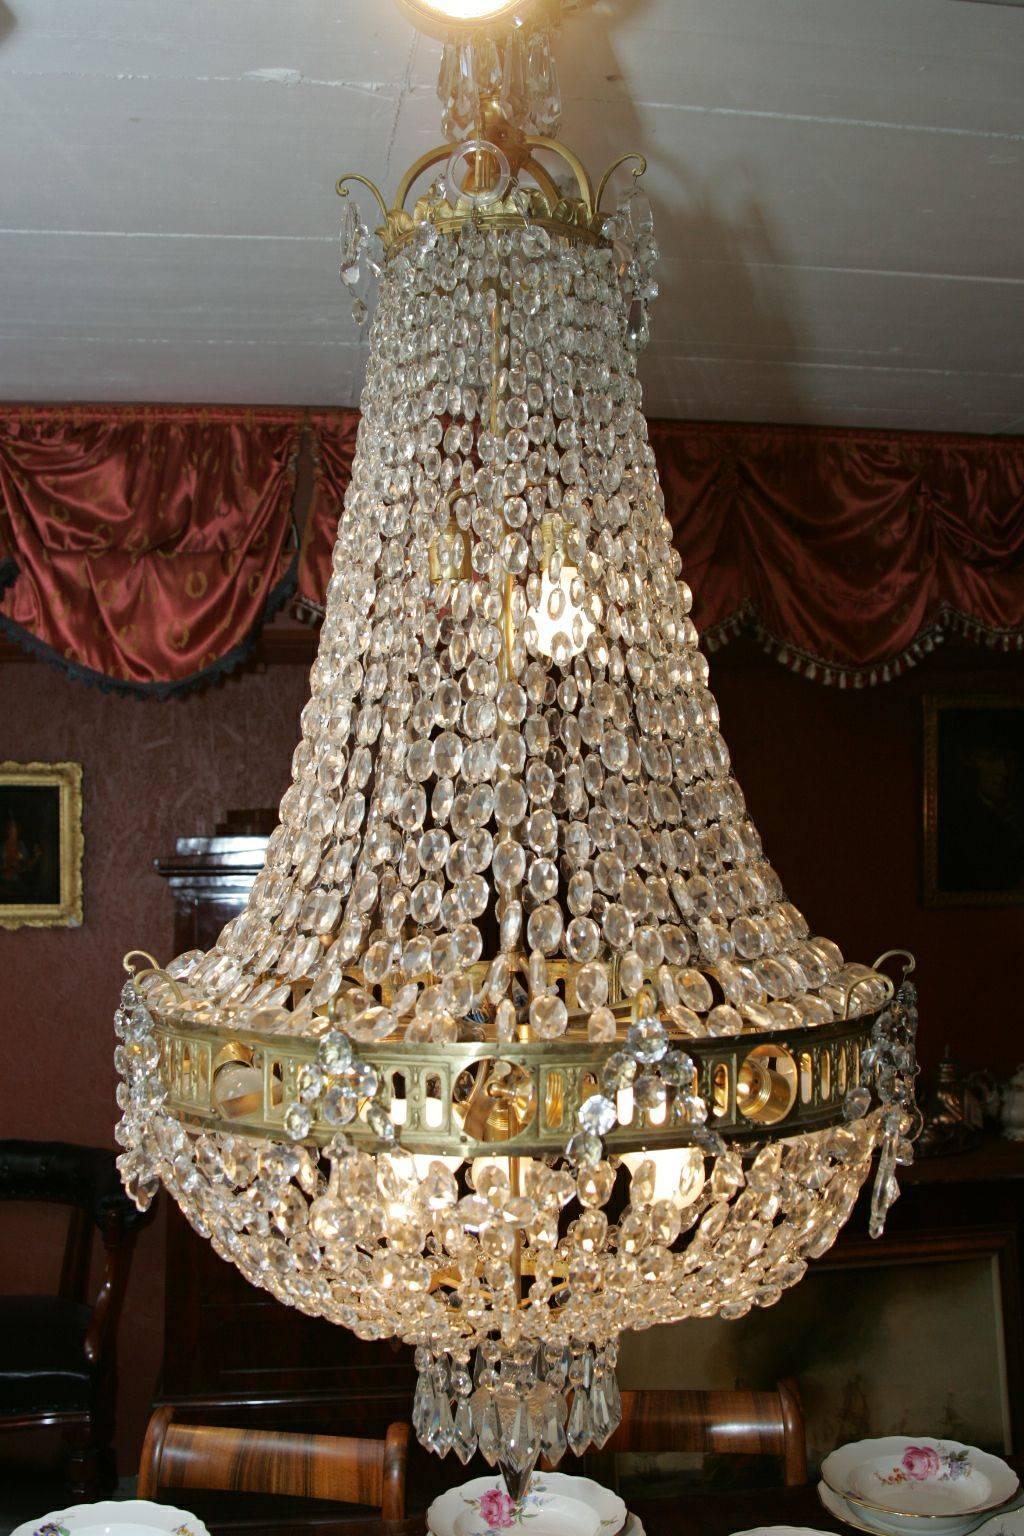 Monumental antique basket chandelier Biedermeier style, circa 1890-1900
Finely chiseled bronze. Basket-shaped body made of hand-wired bead cords. In the course of leaf rosette and final pine knob. Connected by broad, ornamental and perforated hoop.